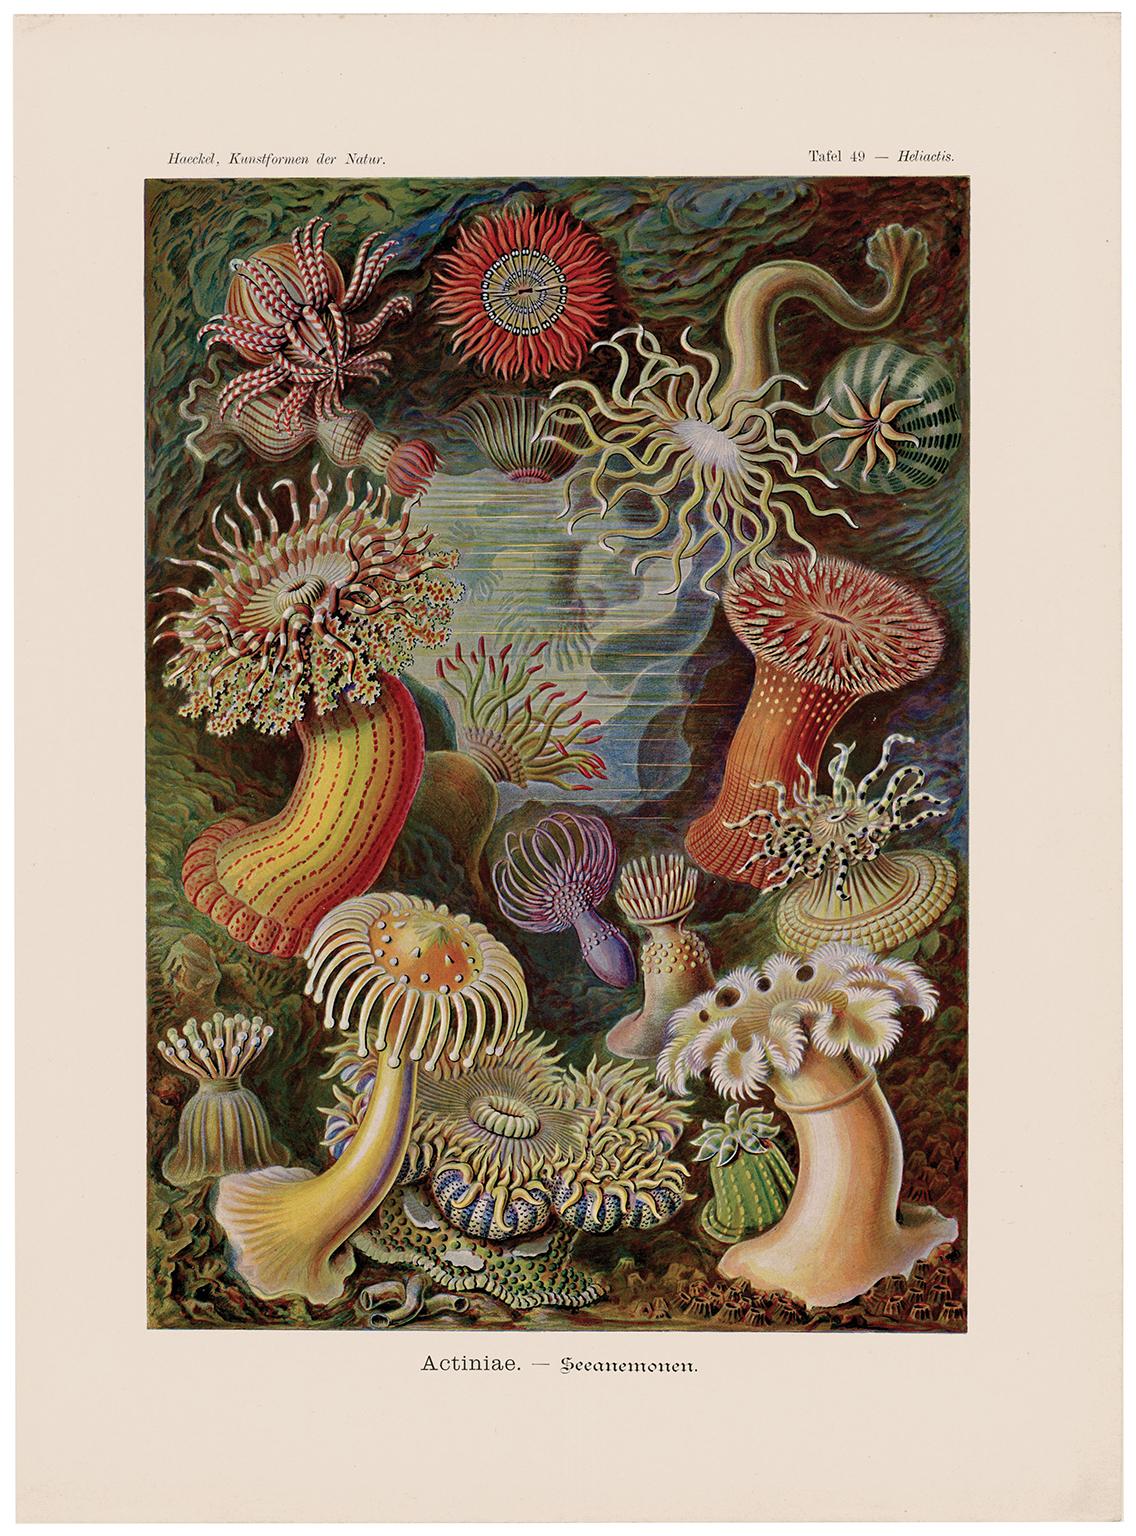 Art Forms in Nature (Plate 49 - Heliactis) — 1988 Celebration of Natural Forms - Print by Ernst Haeckel